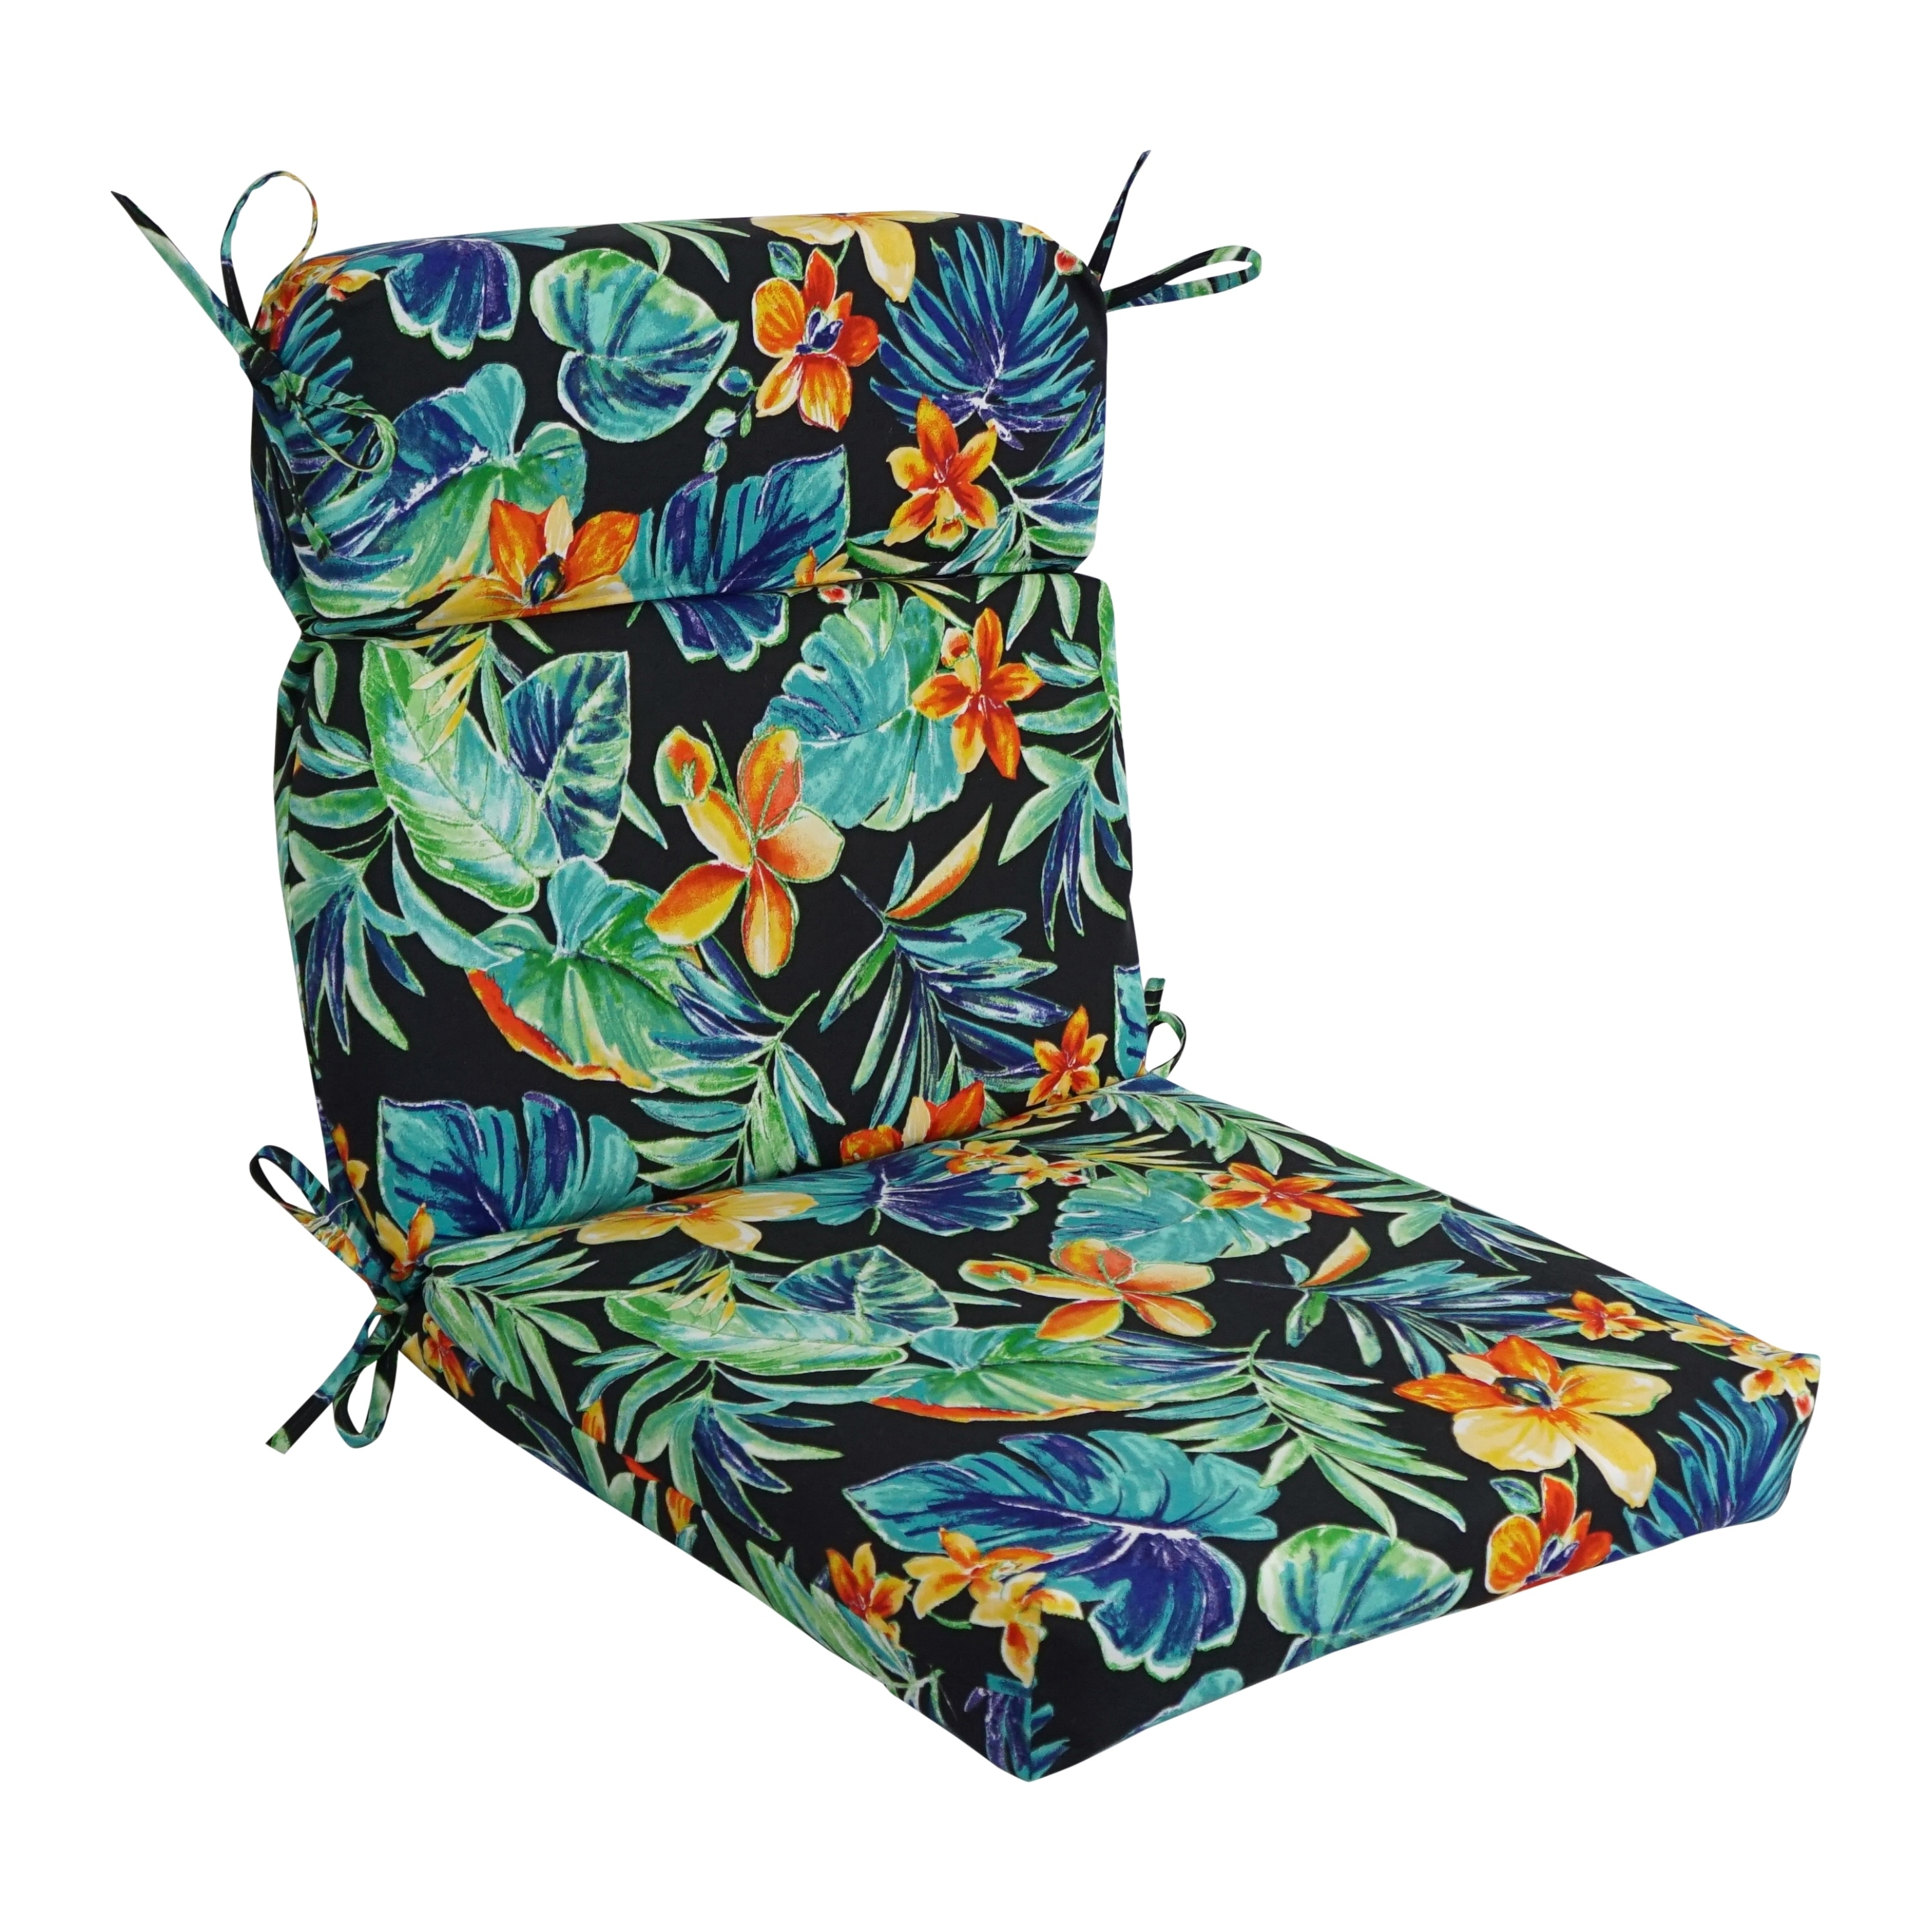 https://ak1.ostkcdn.com/images/products/is/images/direct/a3a7de08f8365628adc4884be516b5329f0297a1/Blazing-Needles-20-X-42-Indoor-Outdoor-Chair-Cushion.jpg